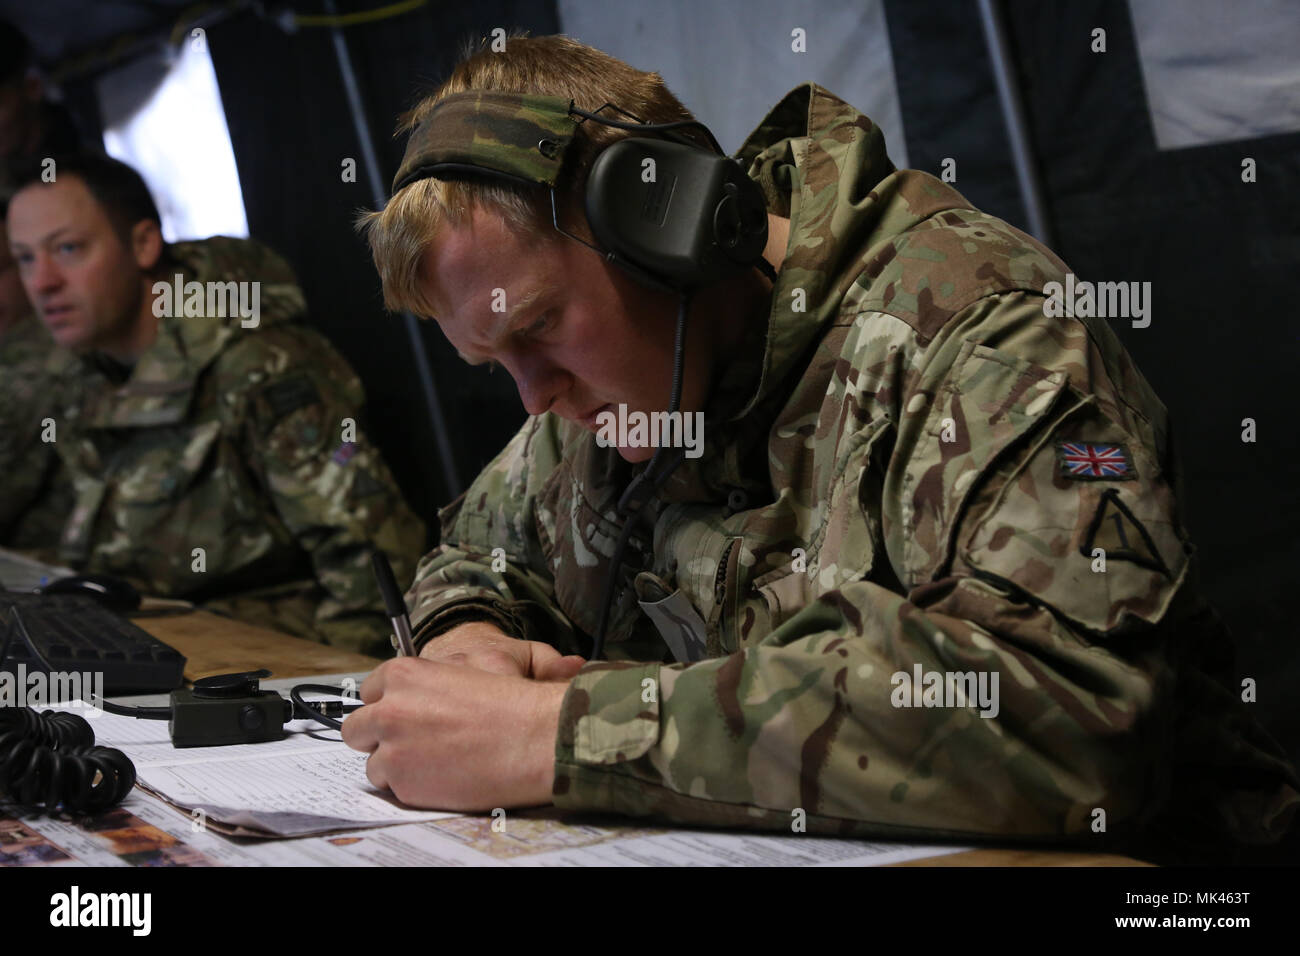 British soldier of the 1st Battalion, Royal Regiment of Fusiliers records mission information while conducting a back brief during exercise Allied Spirit VII at the U.S. Army’s Joint Multinational Readiness Center in Hohenfels, Germany, Nov. 5, 2017. Approximately 4,050 service members from 13 nations are participating in exercise Allied Spirit VII at 7th Army Training Command’s Hohenfels Training Area, Germany, Oct. 30 to Nov. 22, 2017. Allied Spirit is a U.S. Army Europe-directed, 7ATC-conducted multinational exercise series designed to develop and enhance NATO and key partner’s interoperabi Stock Photo